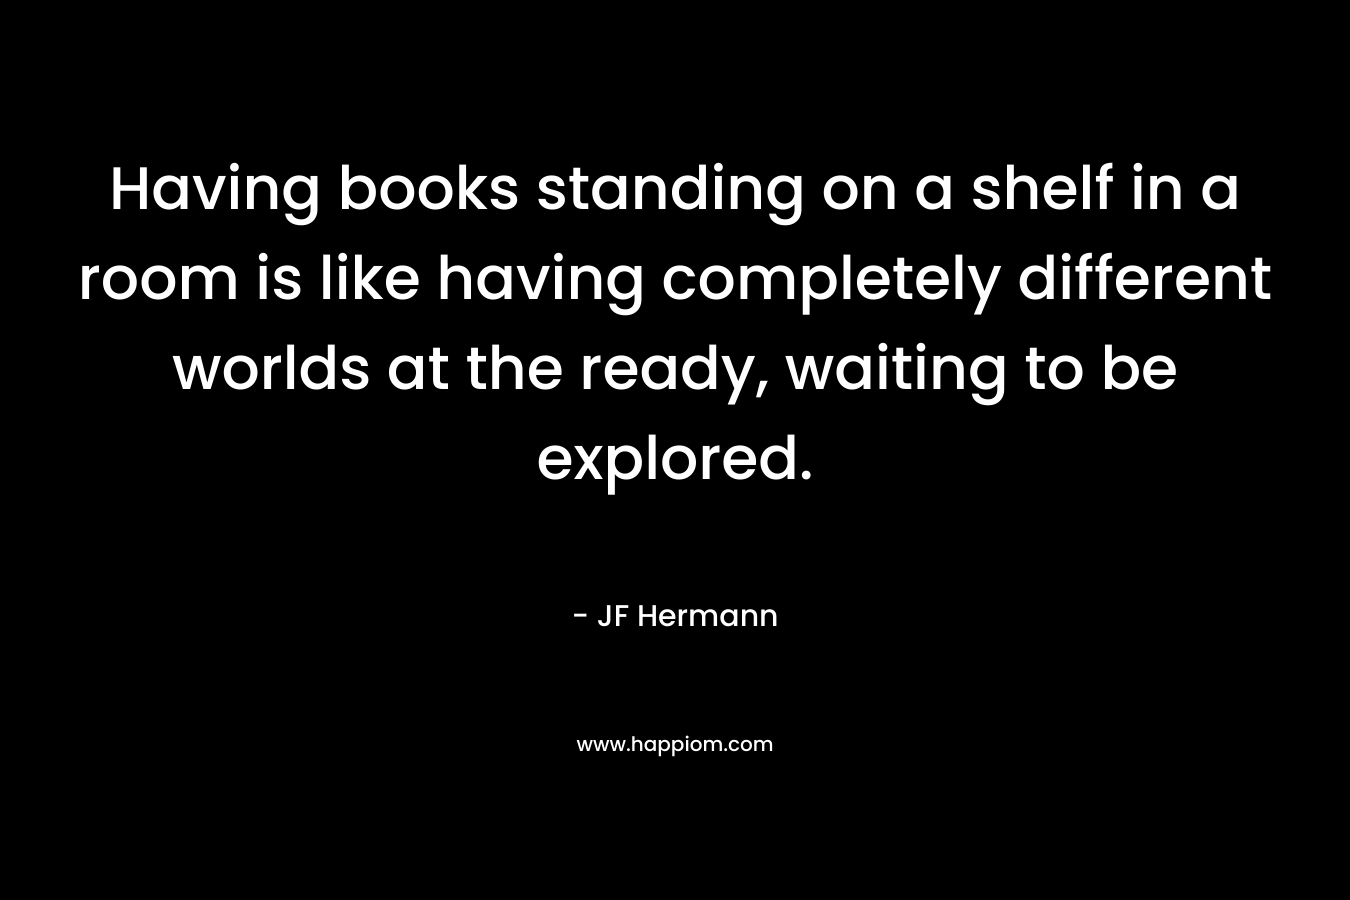 Having books standing on a shelf in a room is like having completely different worlds at the ready, waiting to be explored.